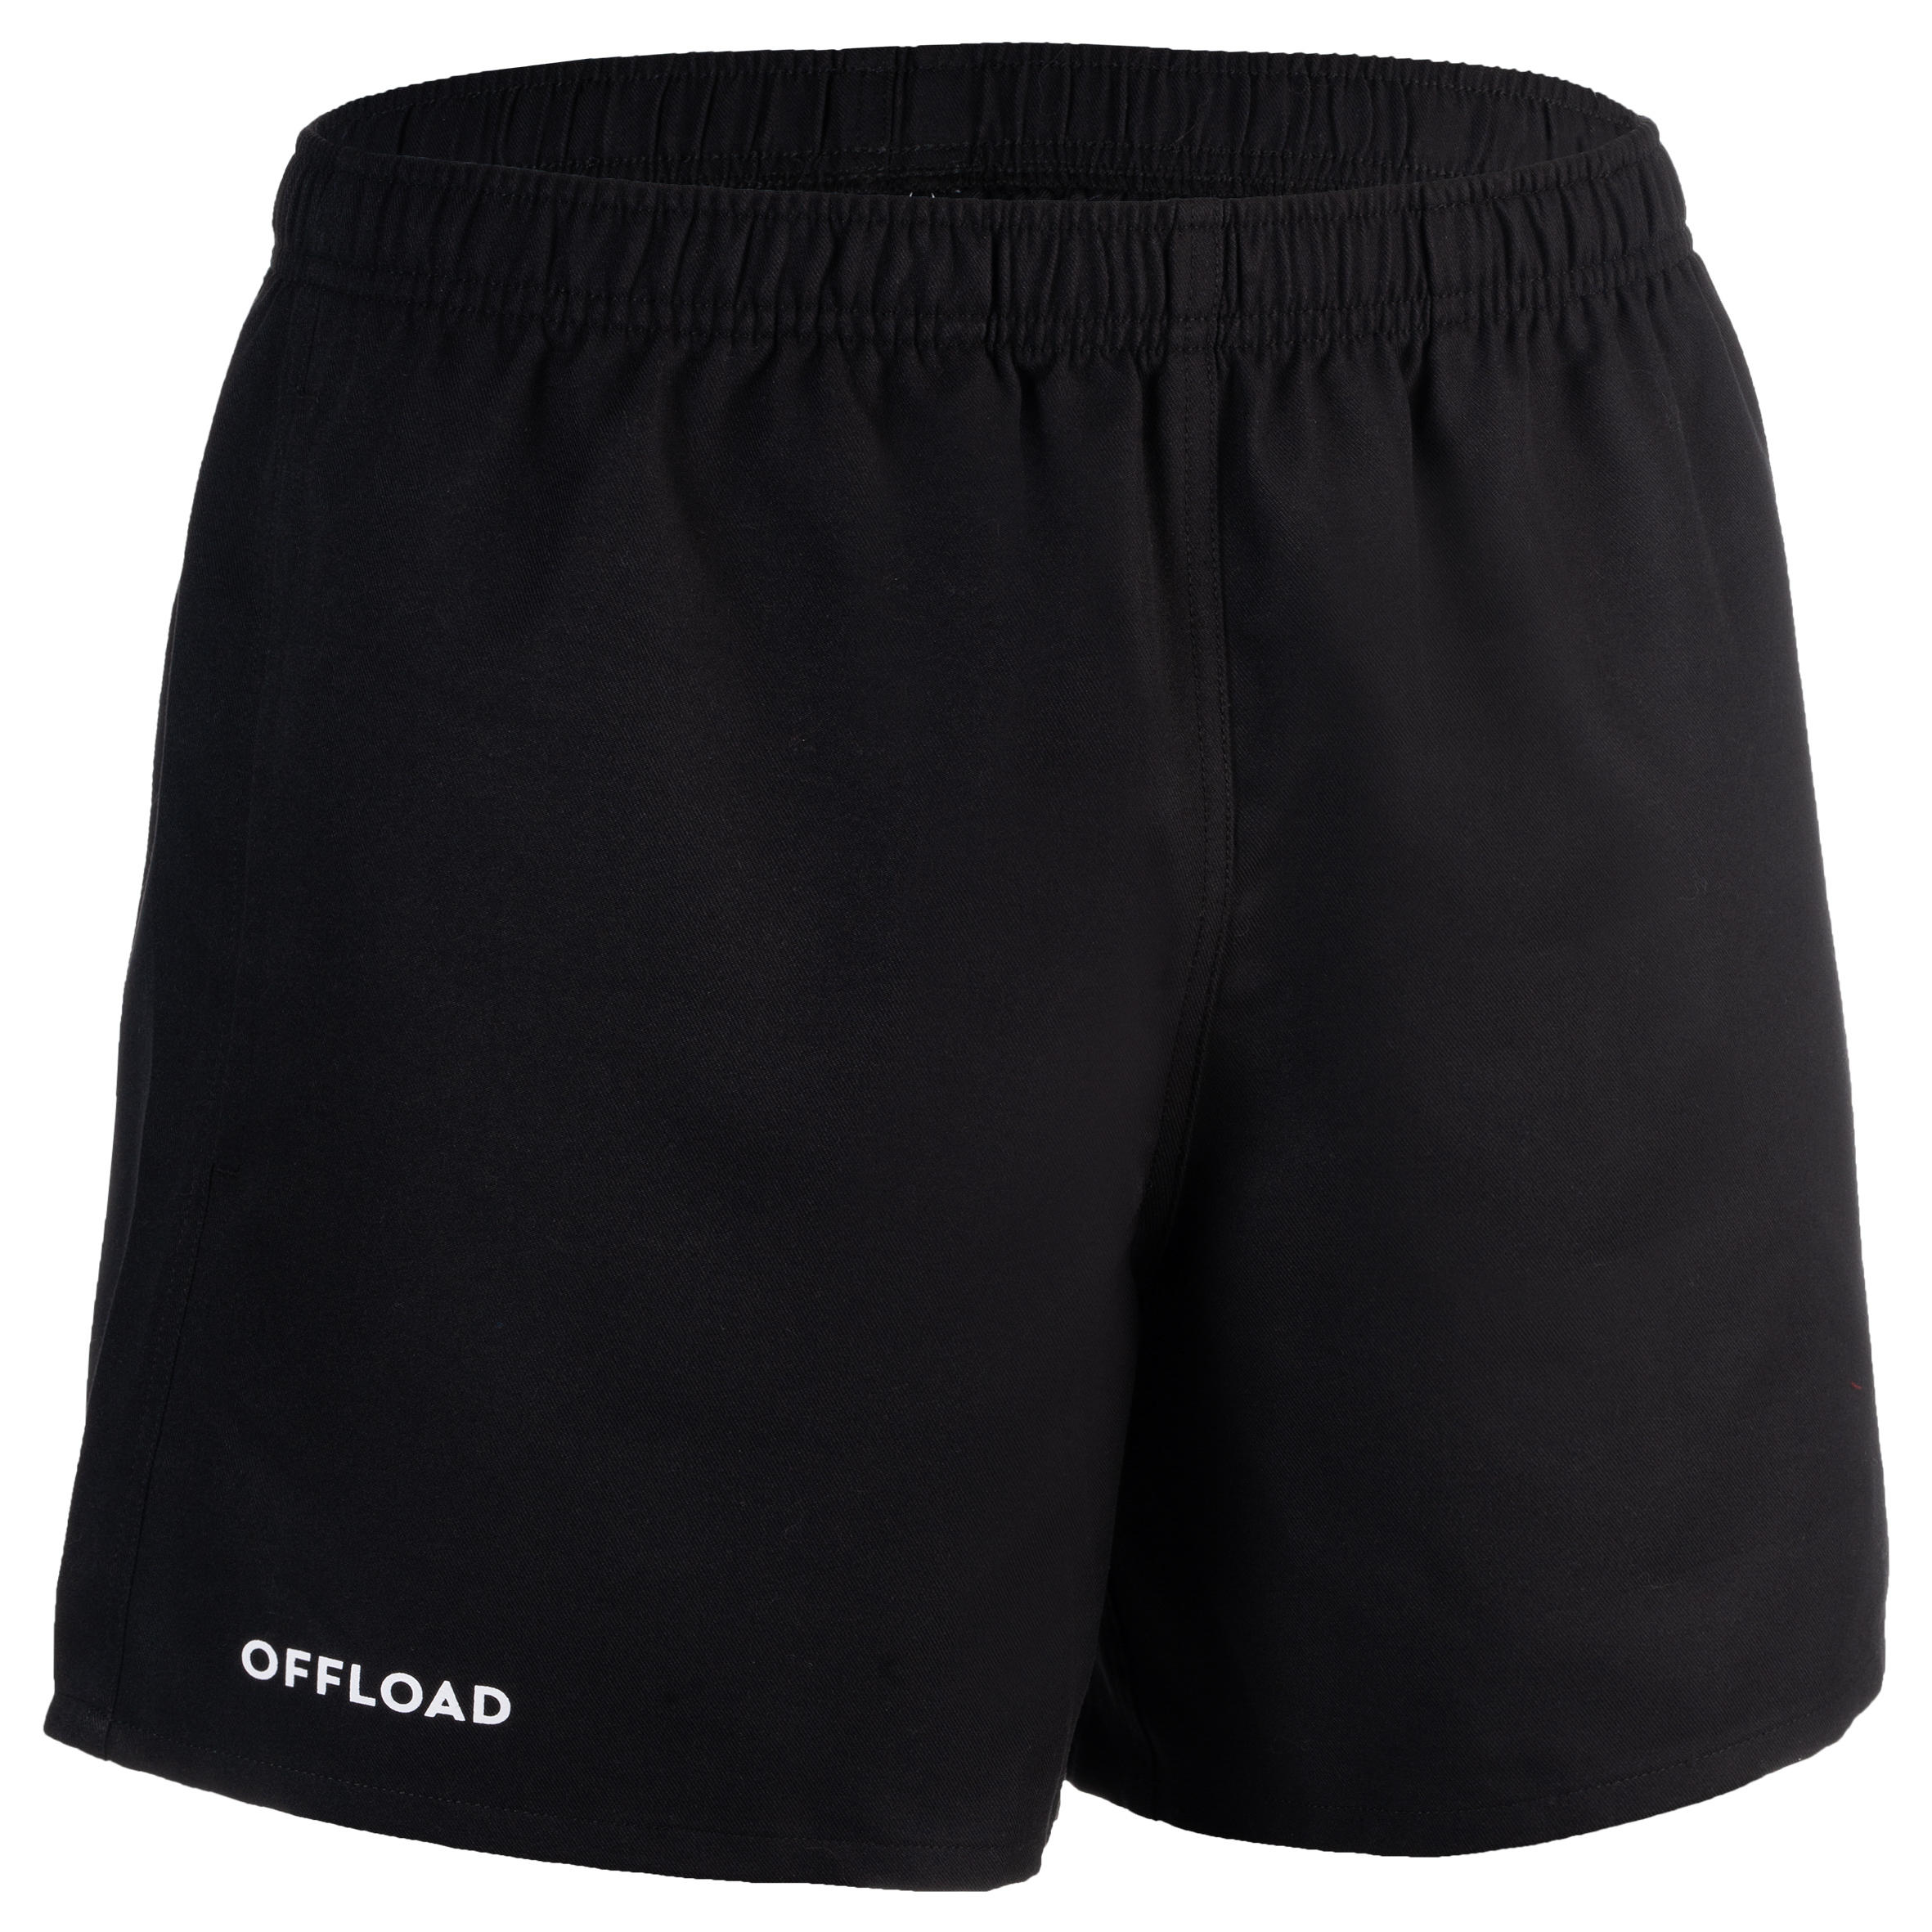 Adult Rugby Shorts with Pockets R100 - Black - L By OFFLOAD | Decathlon